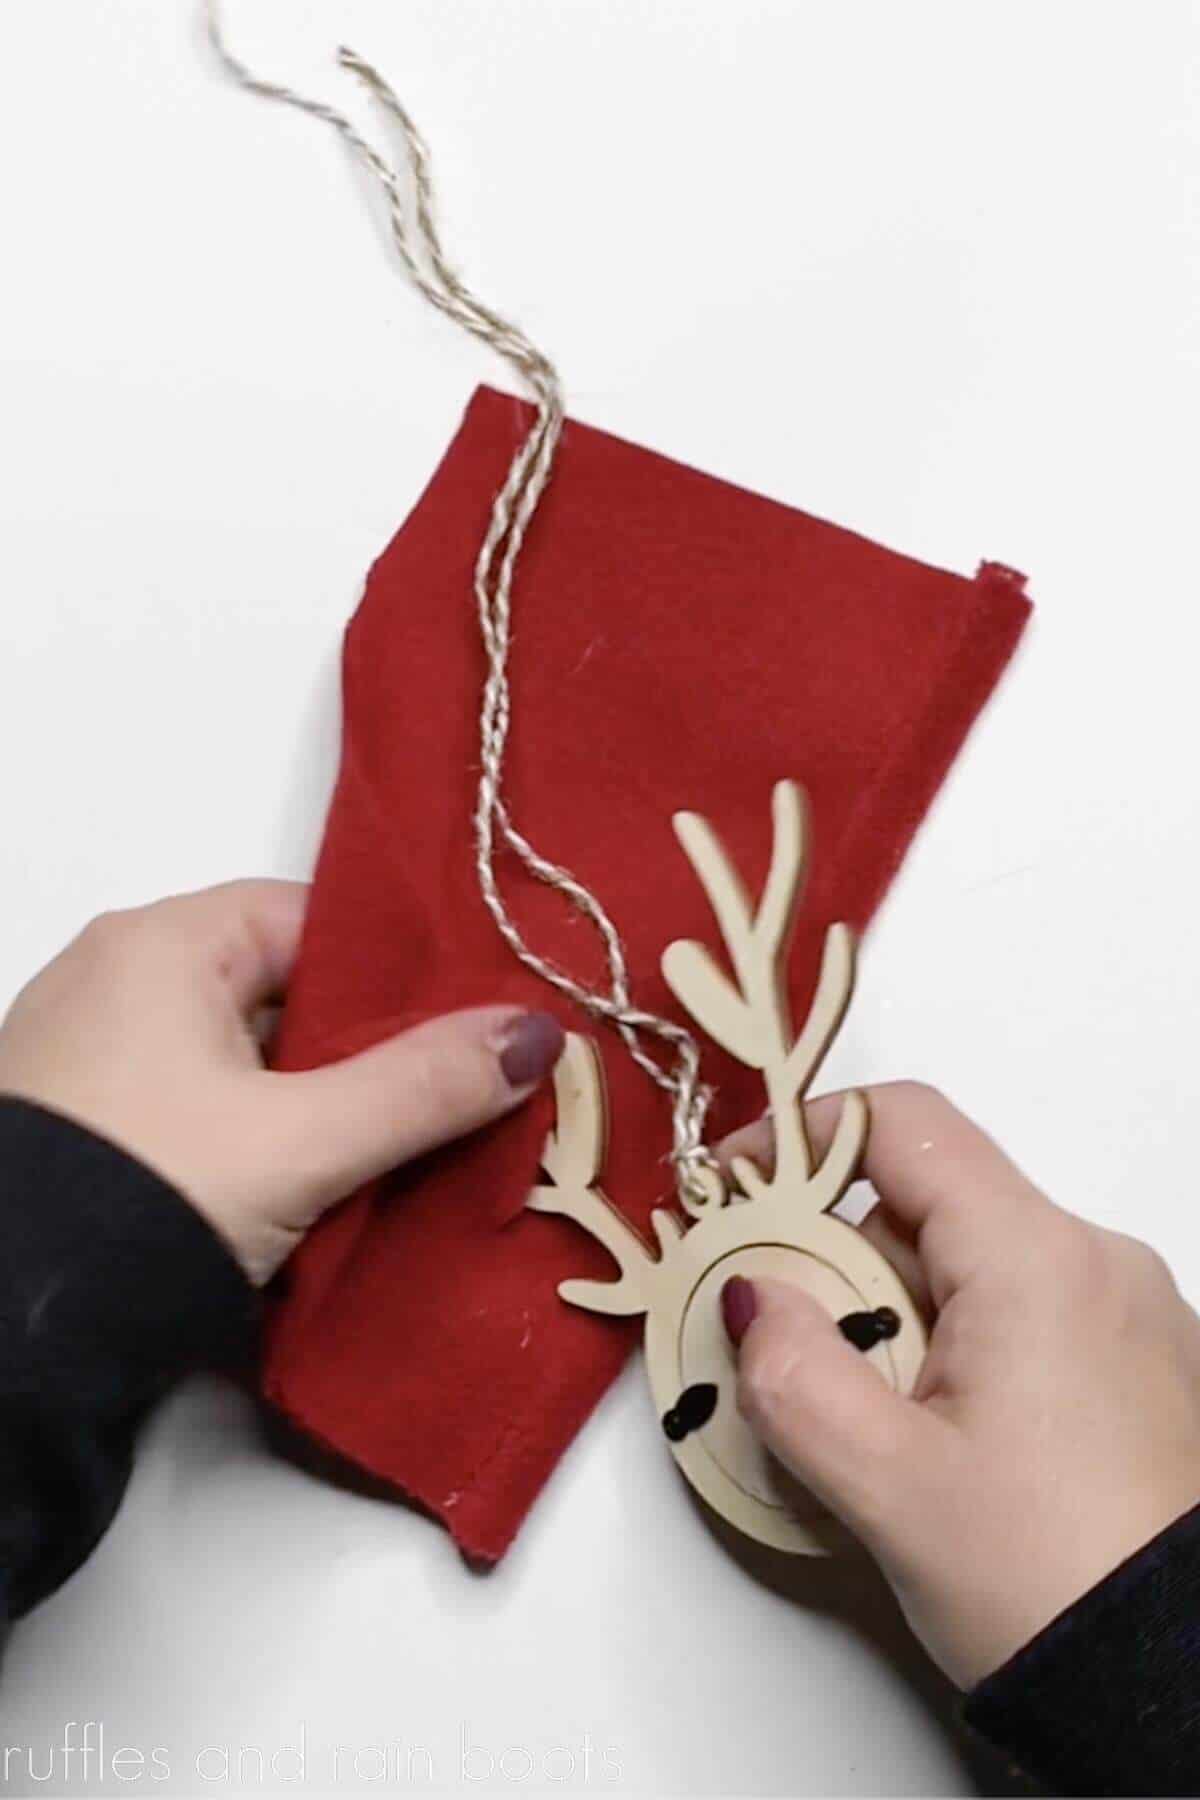 Crafter placing a gnome hat through antlers a reindeer ornament made of wood.